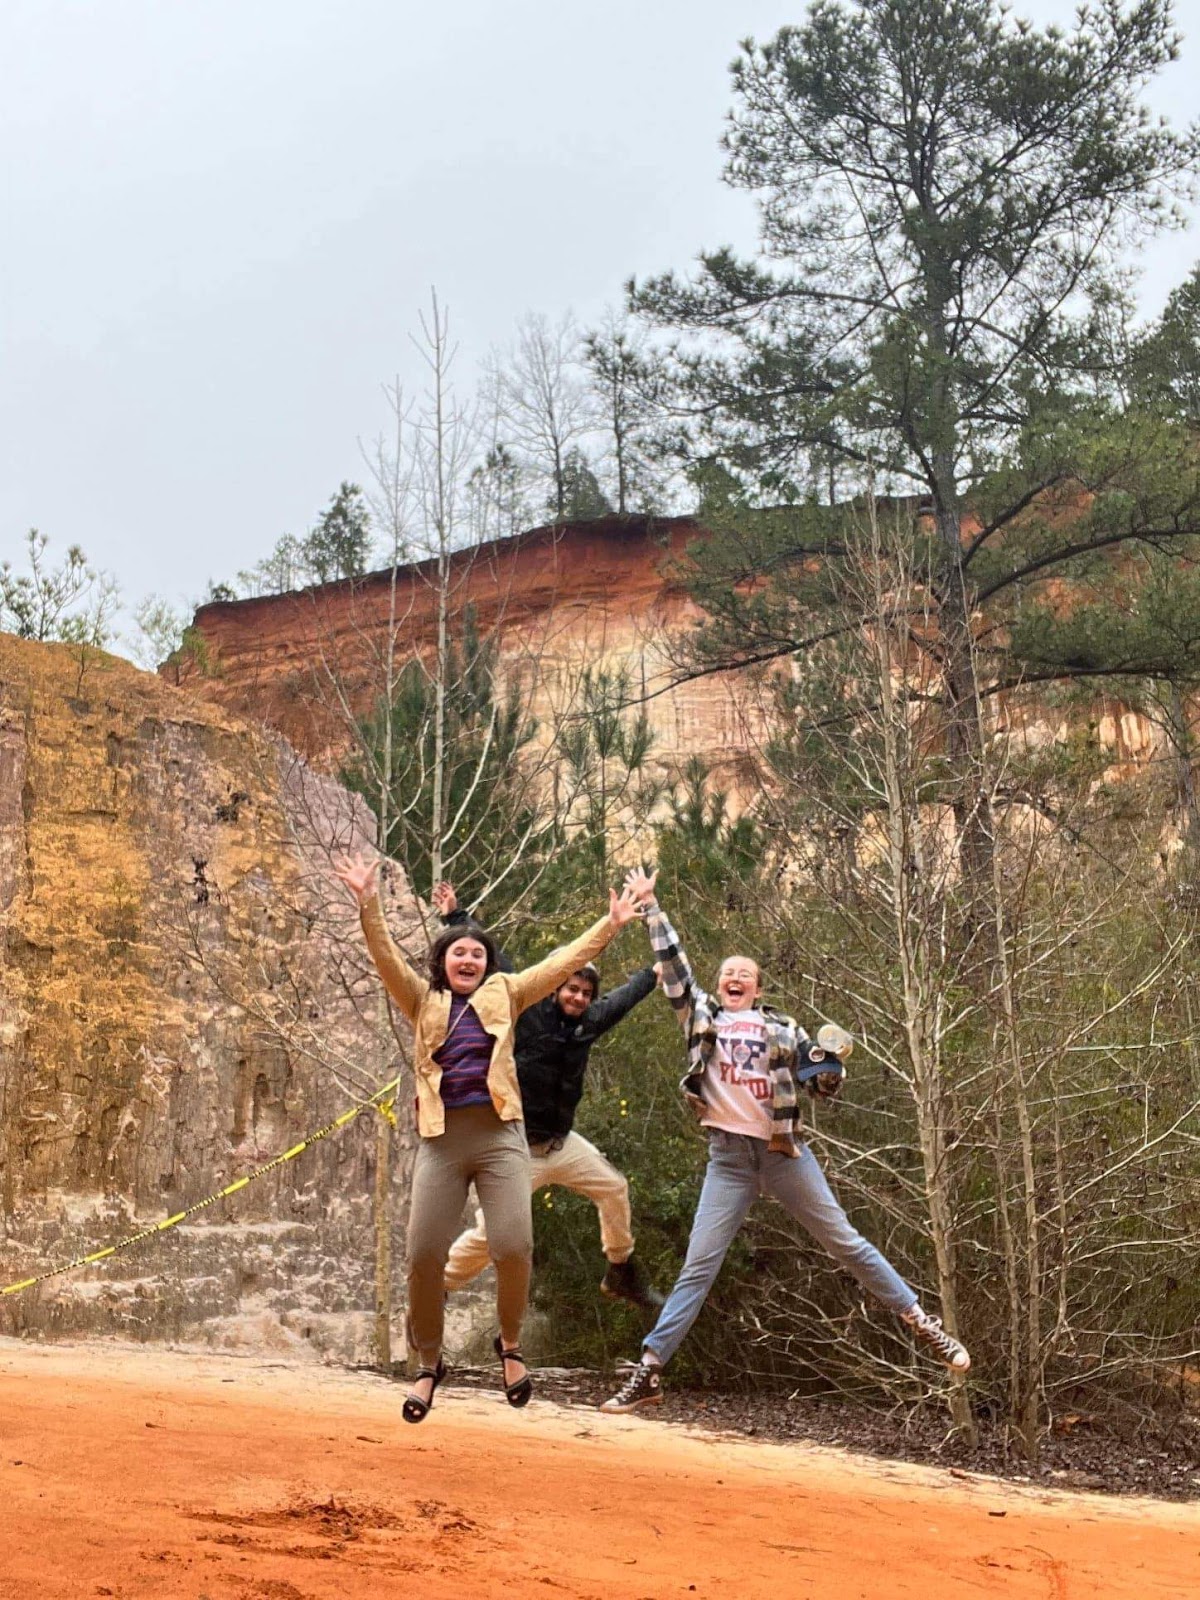 Students jumping on a rock outdoors in the environment. 